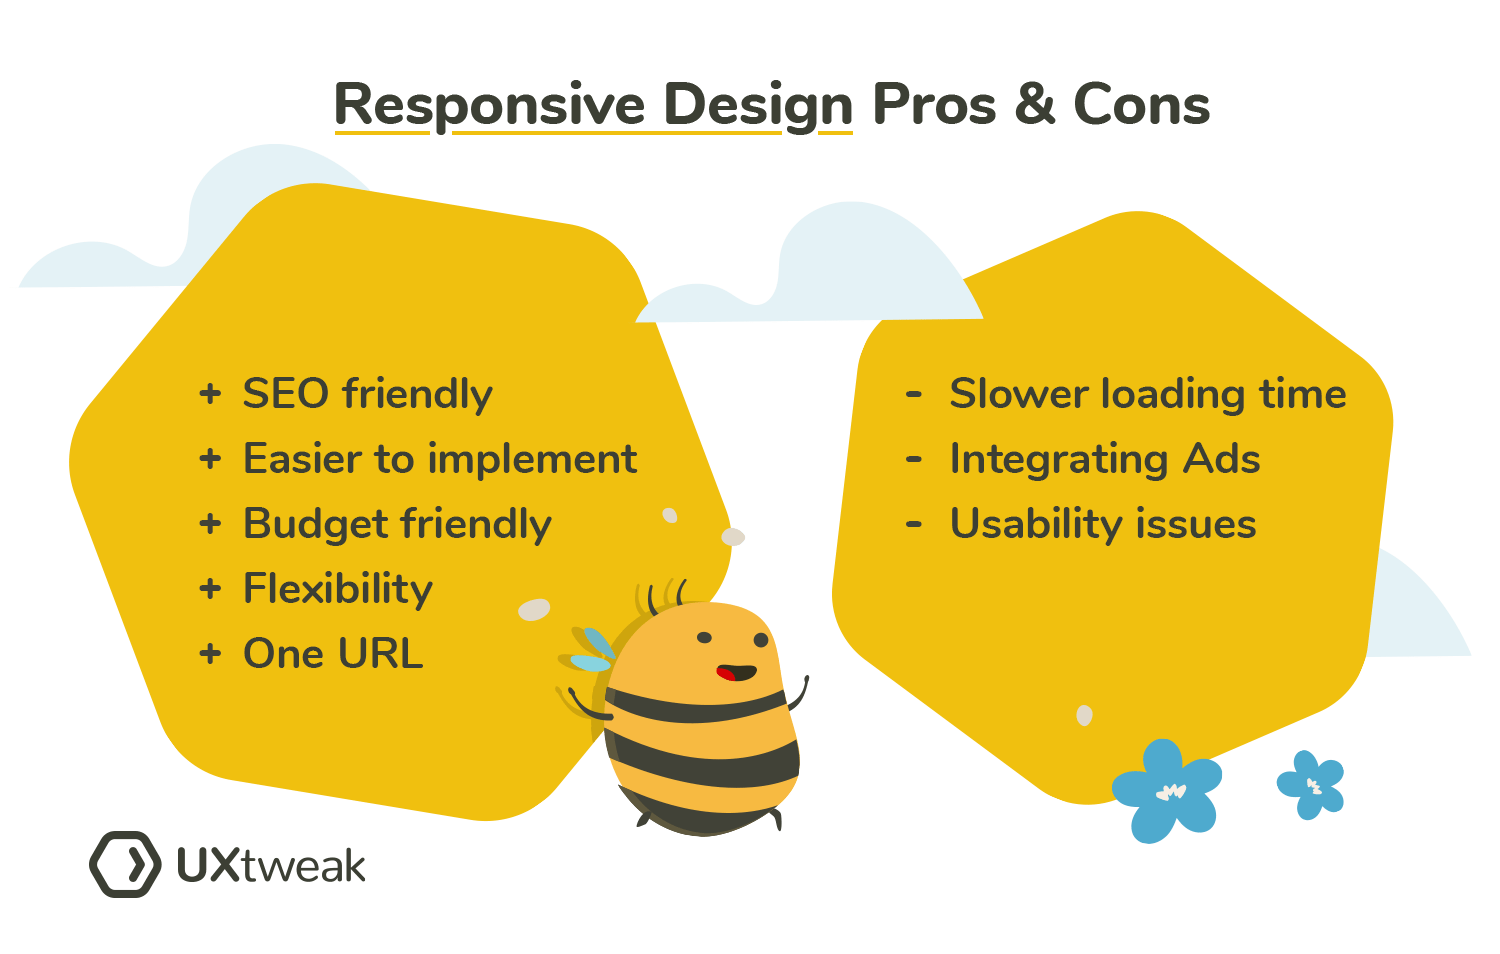 Responsive design pros and cons